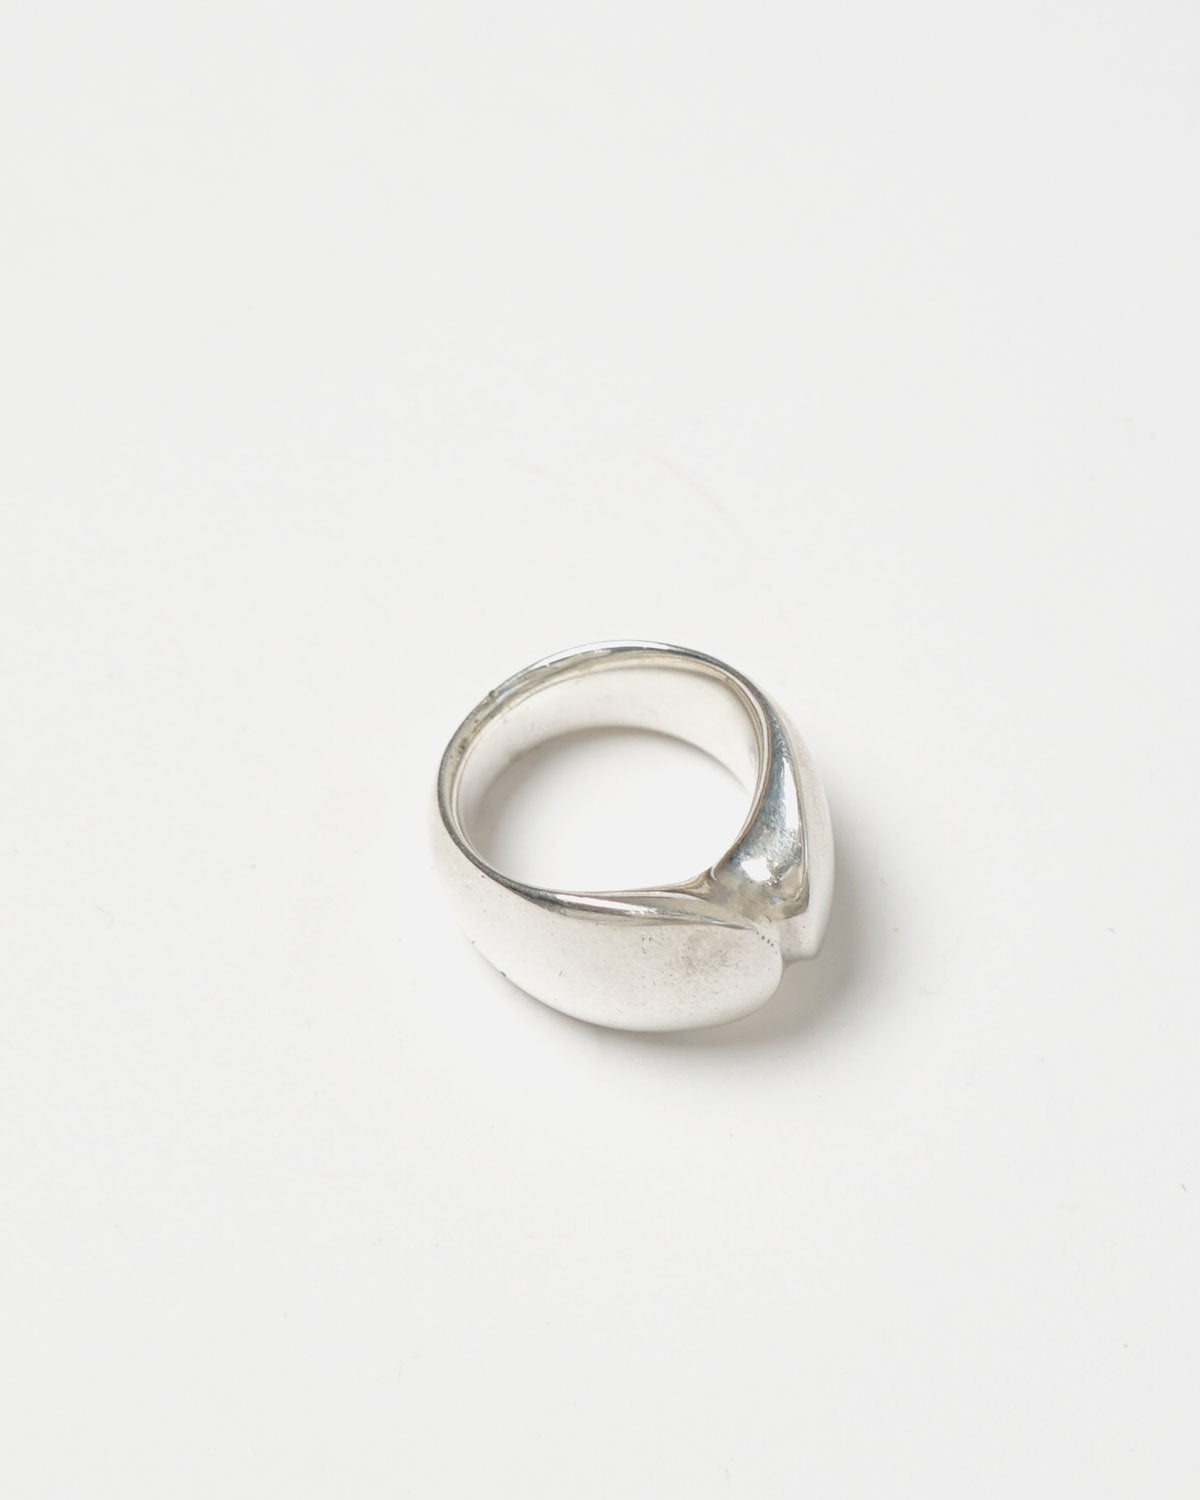 Silver Ring / size: 4.5